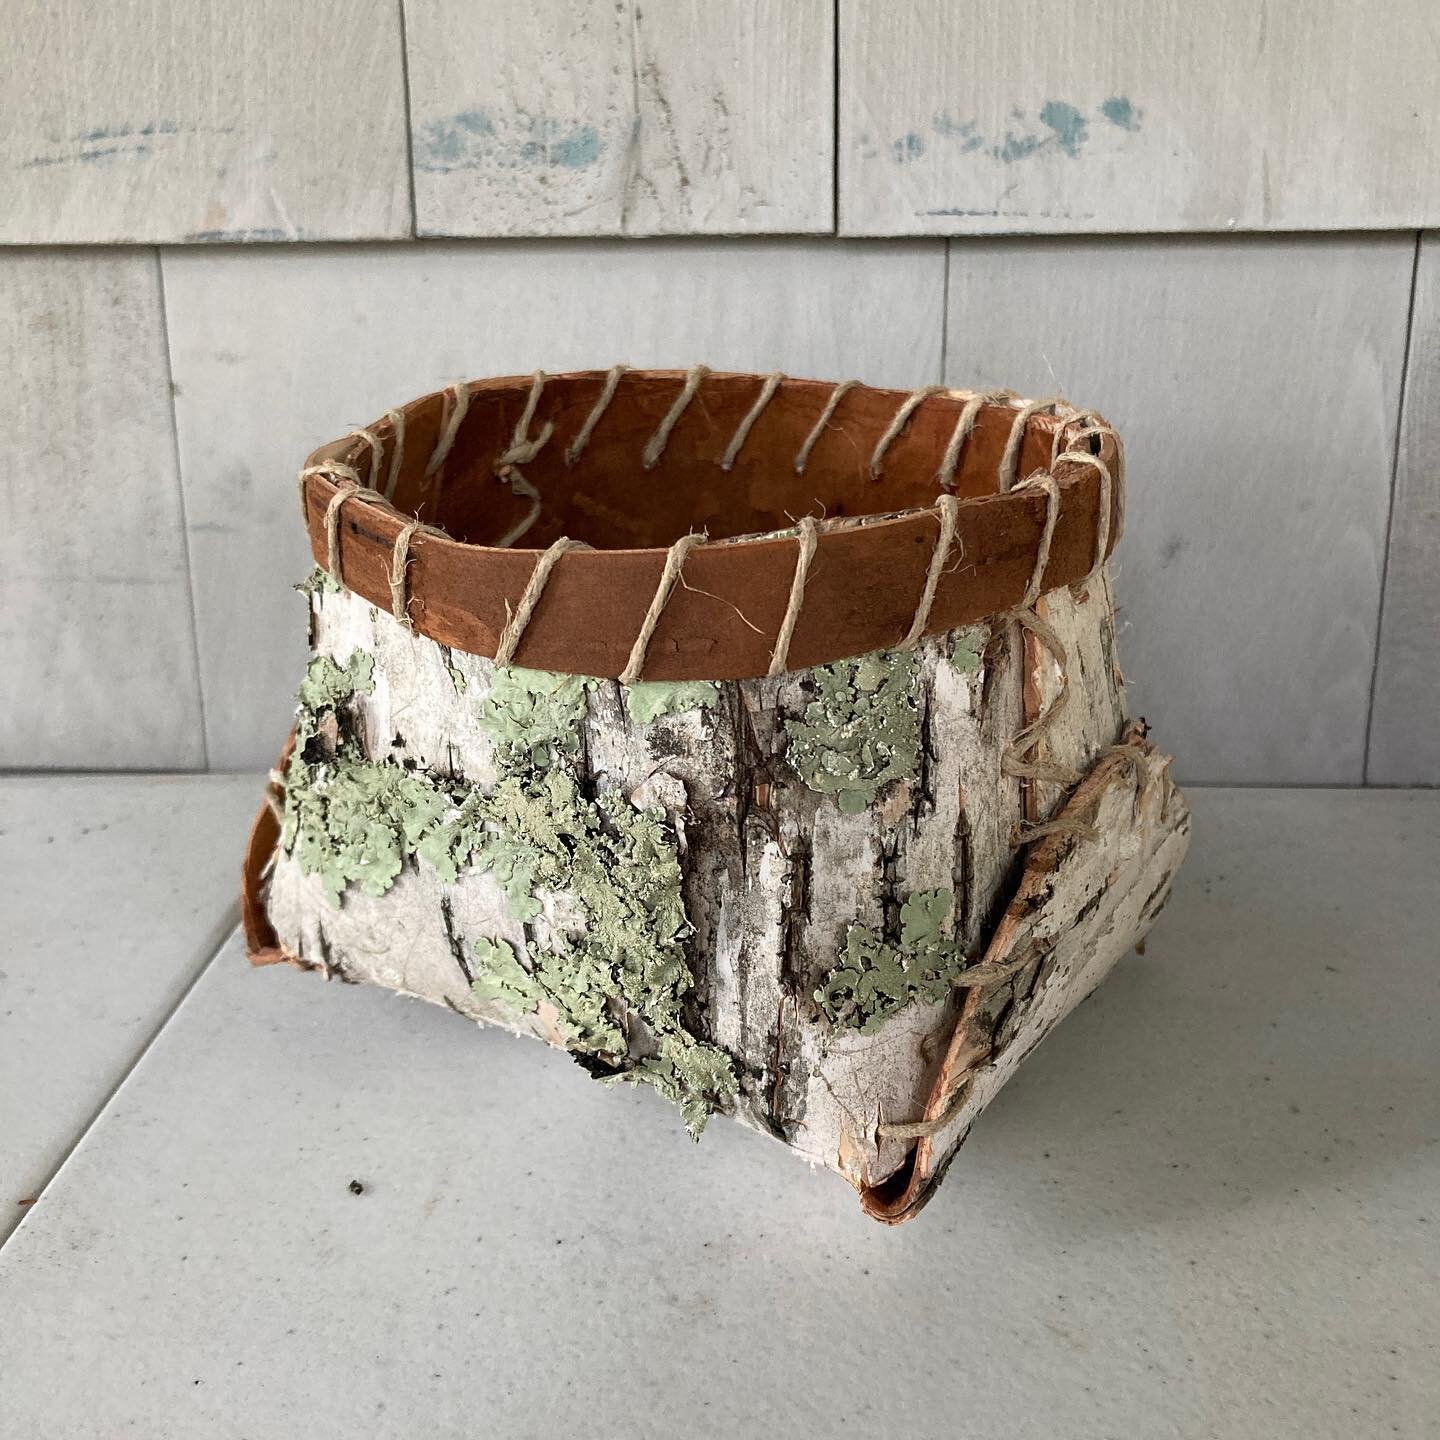 Spent a very gratifying afternoon playing with &quot;new&quot; birch bark from this morning's surprise acquisition. I decided to start with a classic form loosely based on a Penobscot basket (fitting, since I am on the Penobscot Bay). I had hemp twin